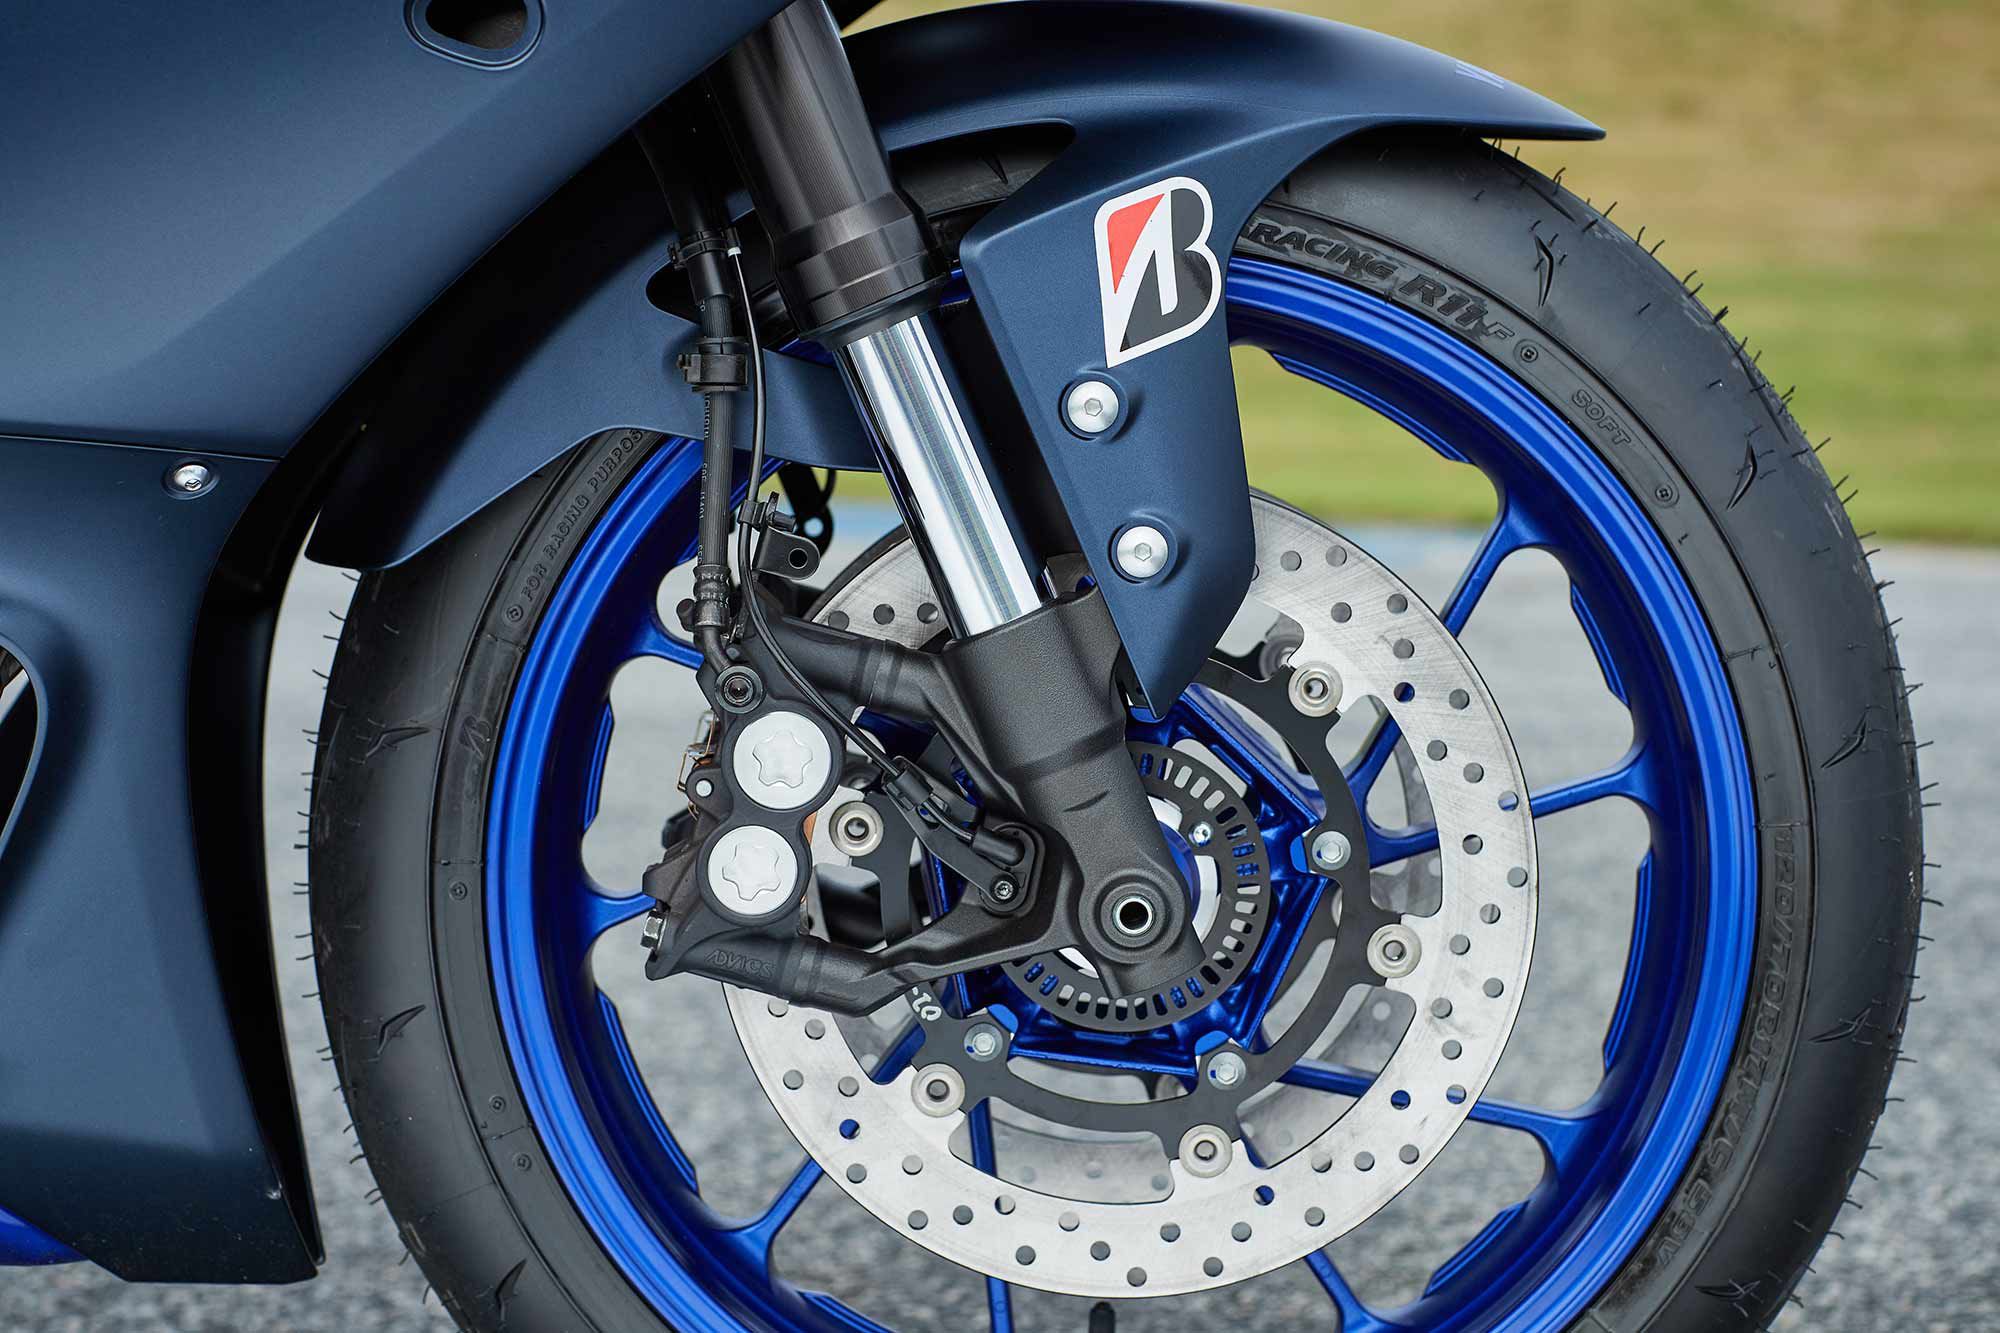 The R7 employs a fully adjustable inverted KYB fork. The suspension components deliver plush action but lack the precise road holding of a four-cylinder Yamaha YZF.